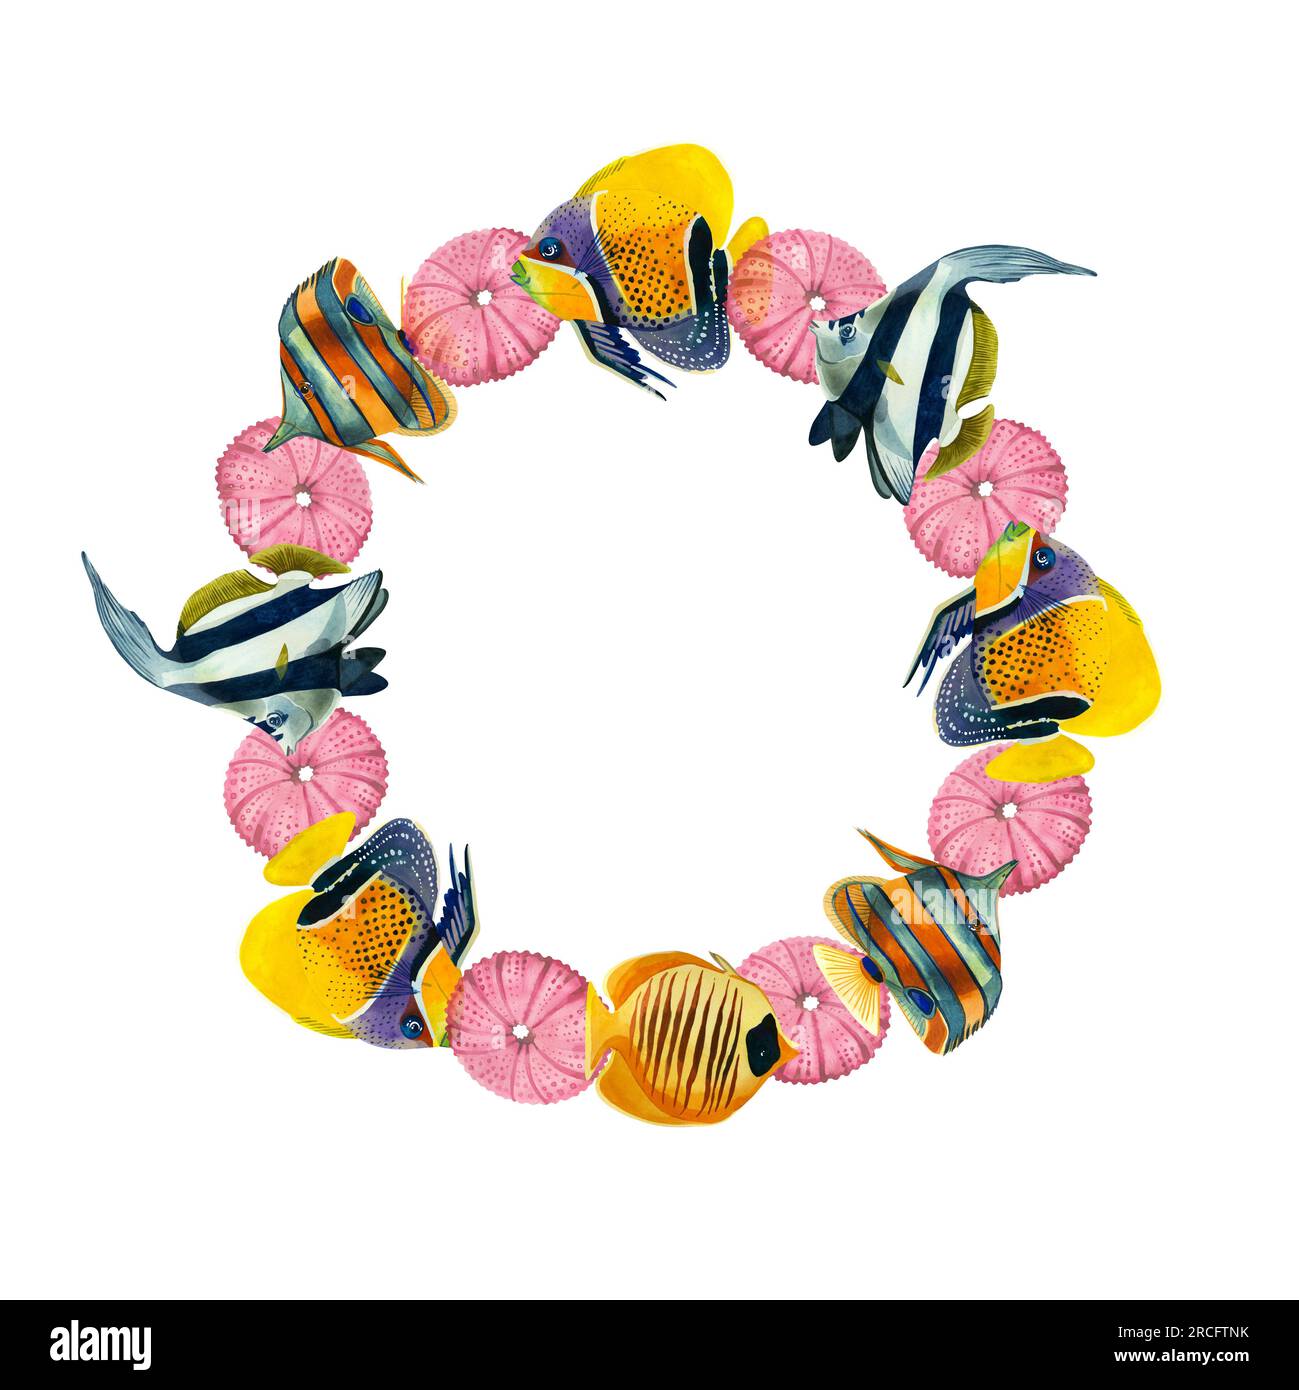 Round frame of tropical fish and pink stars on a white background. All elements are hand-drawn in watercolor on a white background. Stock Photo